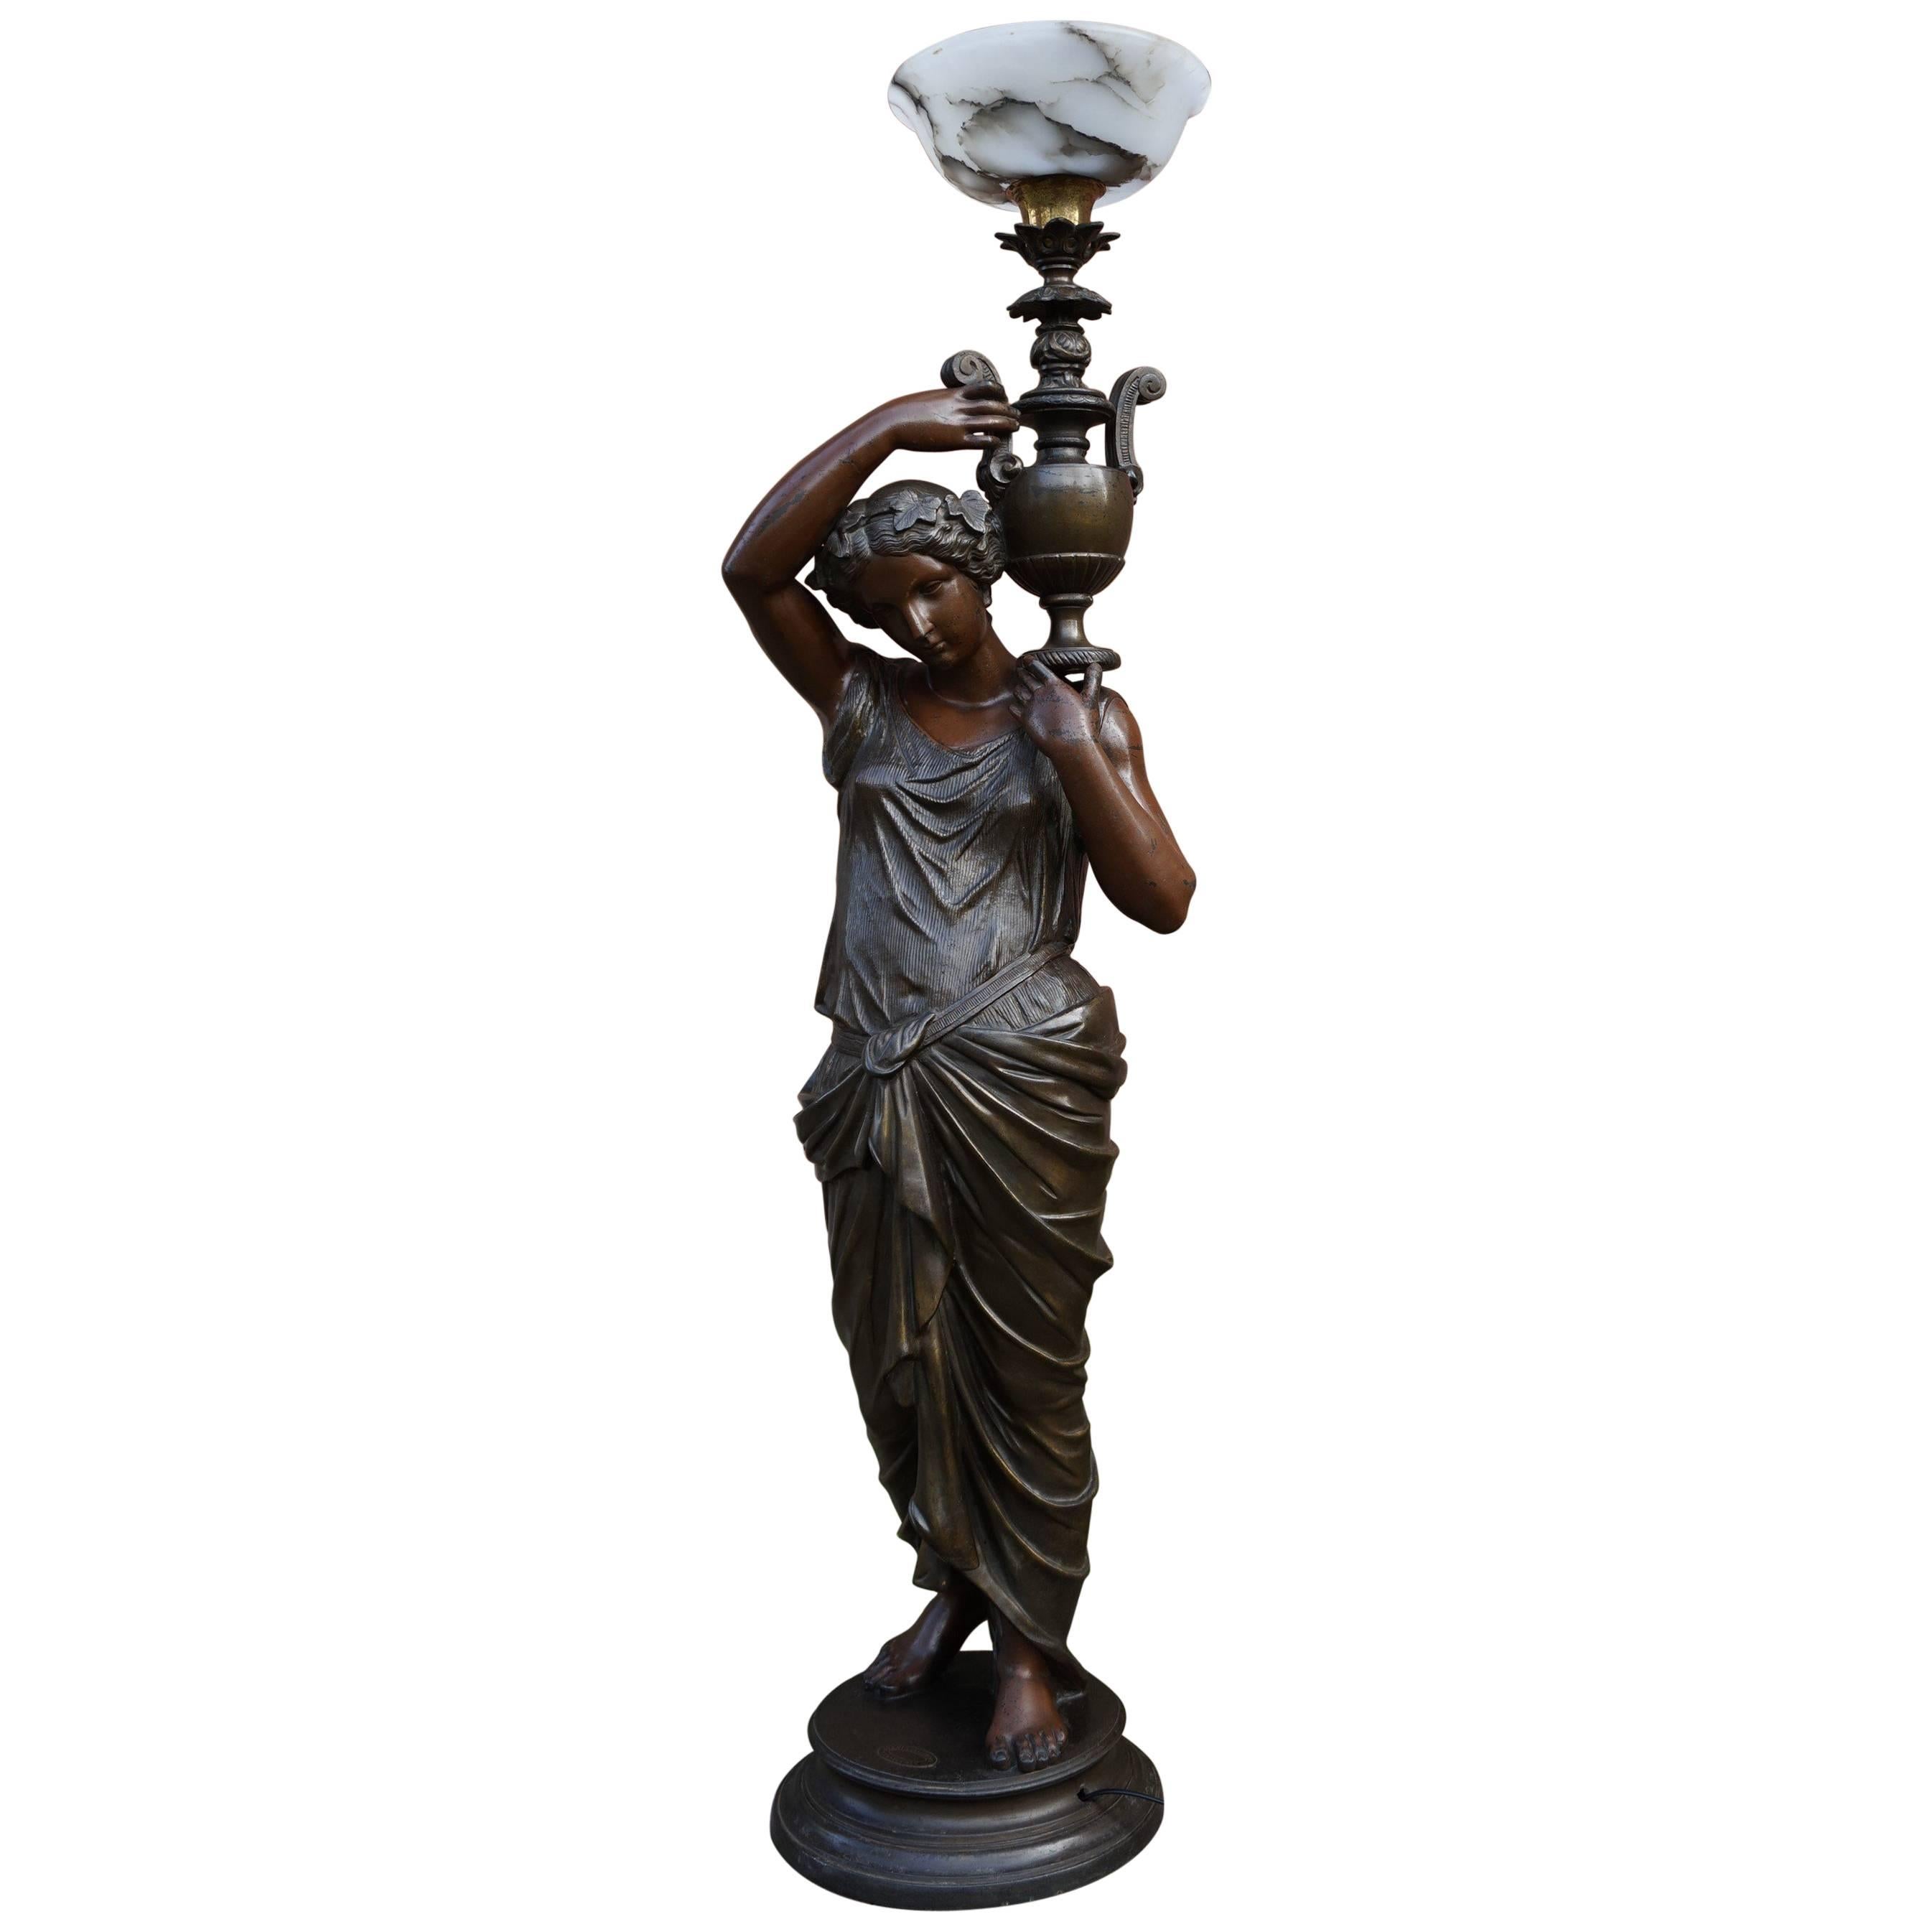 Art Nouveau Era, Bronzed and Marked 4 Feet Floor Lamp of Dione Goddess of Water